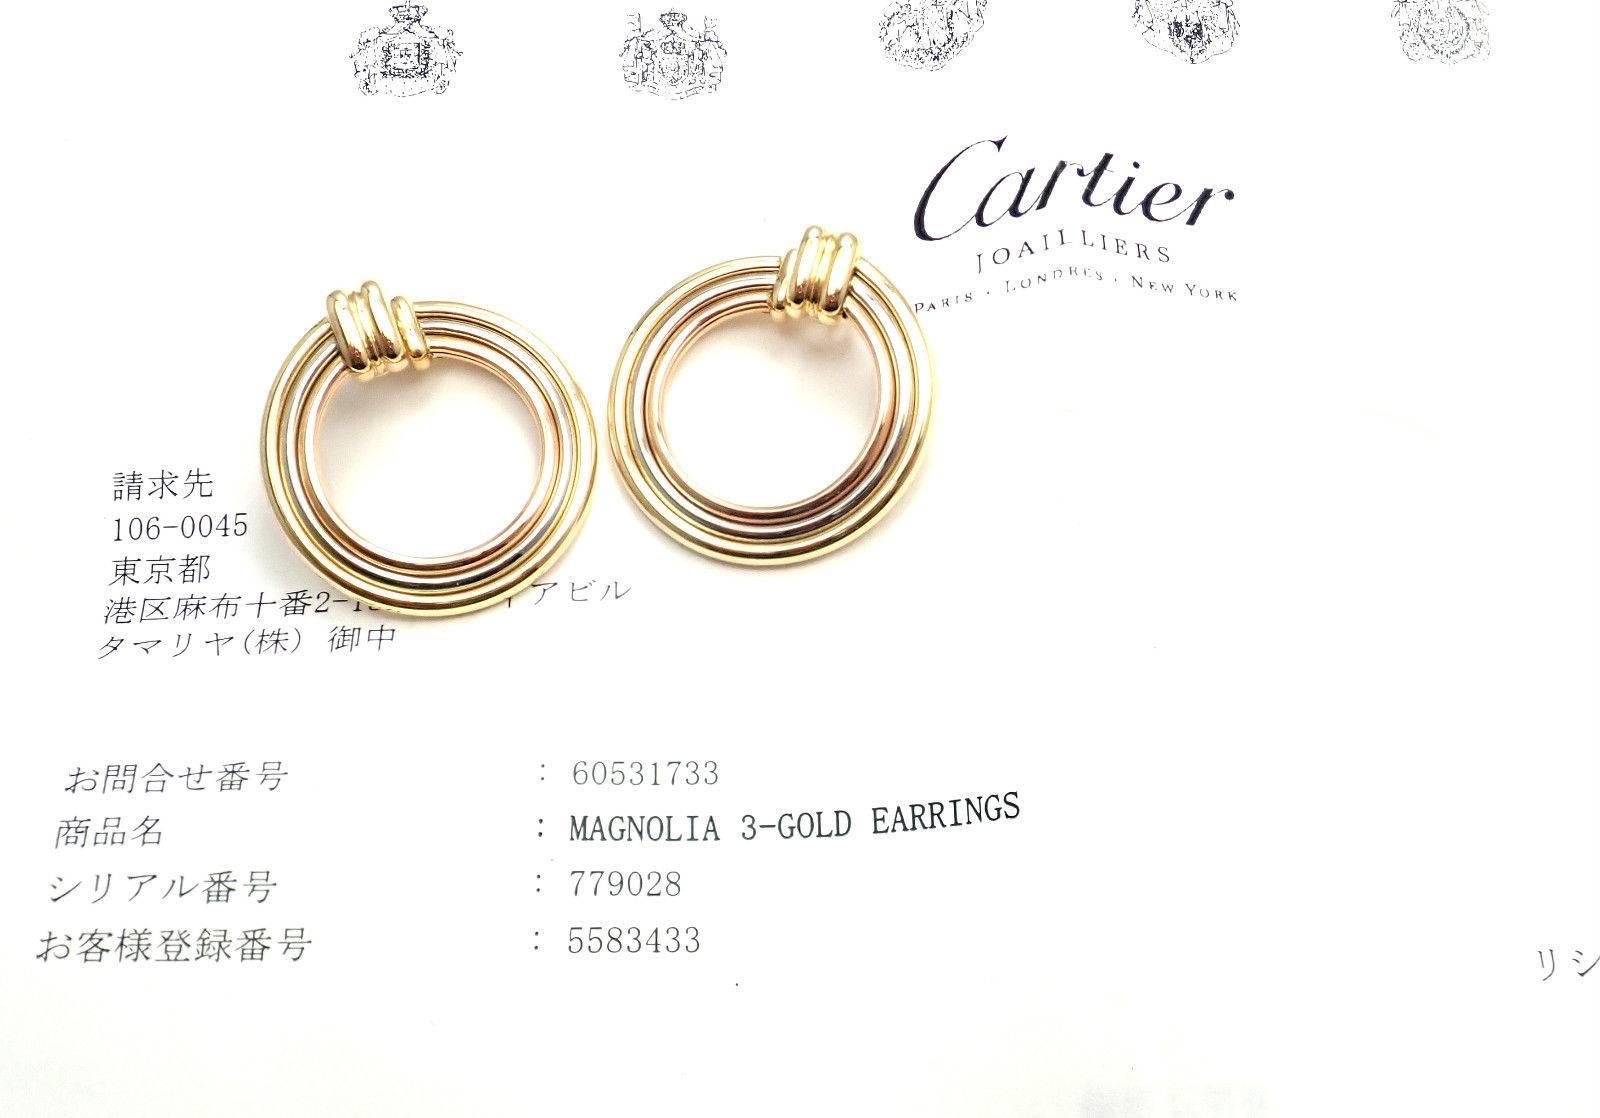 18k Tri-Colored Gold (Yellow, White, Rose) Cartier Magnolia Earrings by Cartier. 
These earrings come with an original Cartier box and a service paper from Cartier store in Japan.
These earrings are for pierced ears. 
Details: 
Weight: 15.5